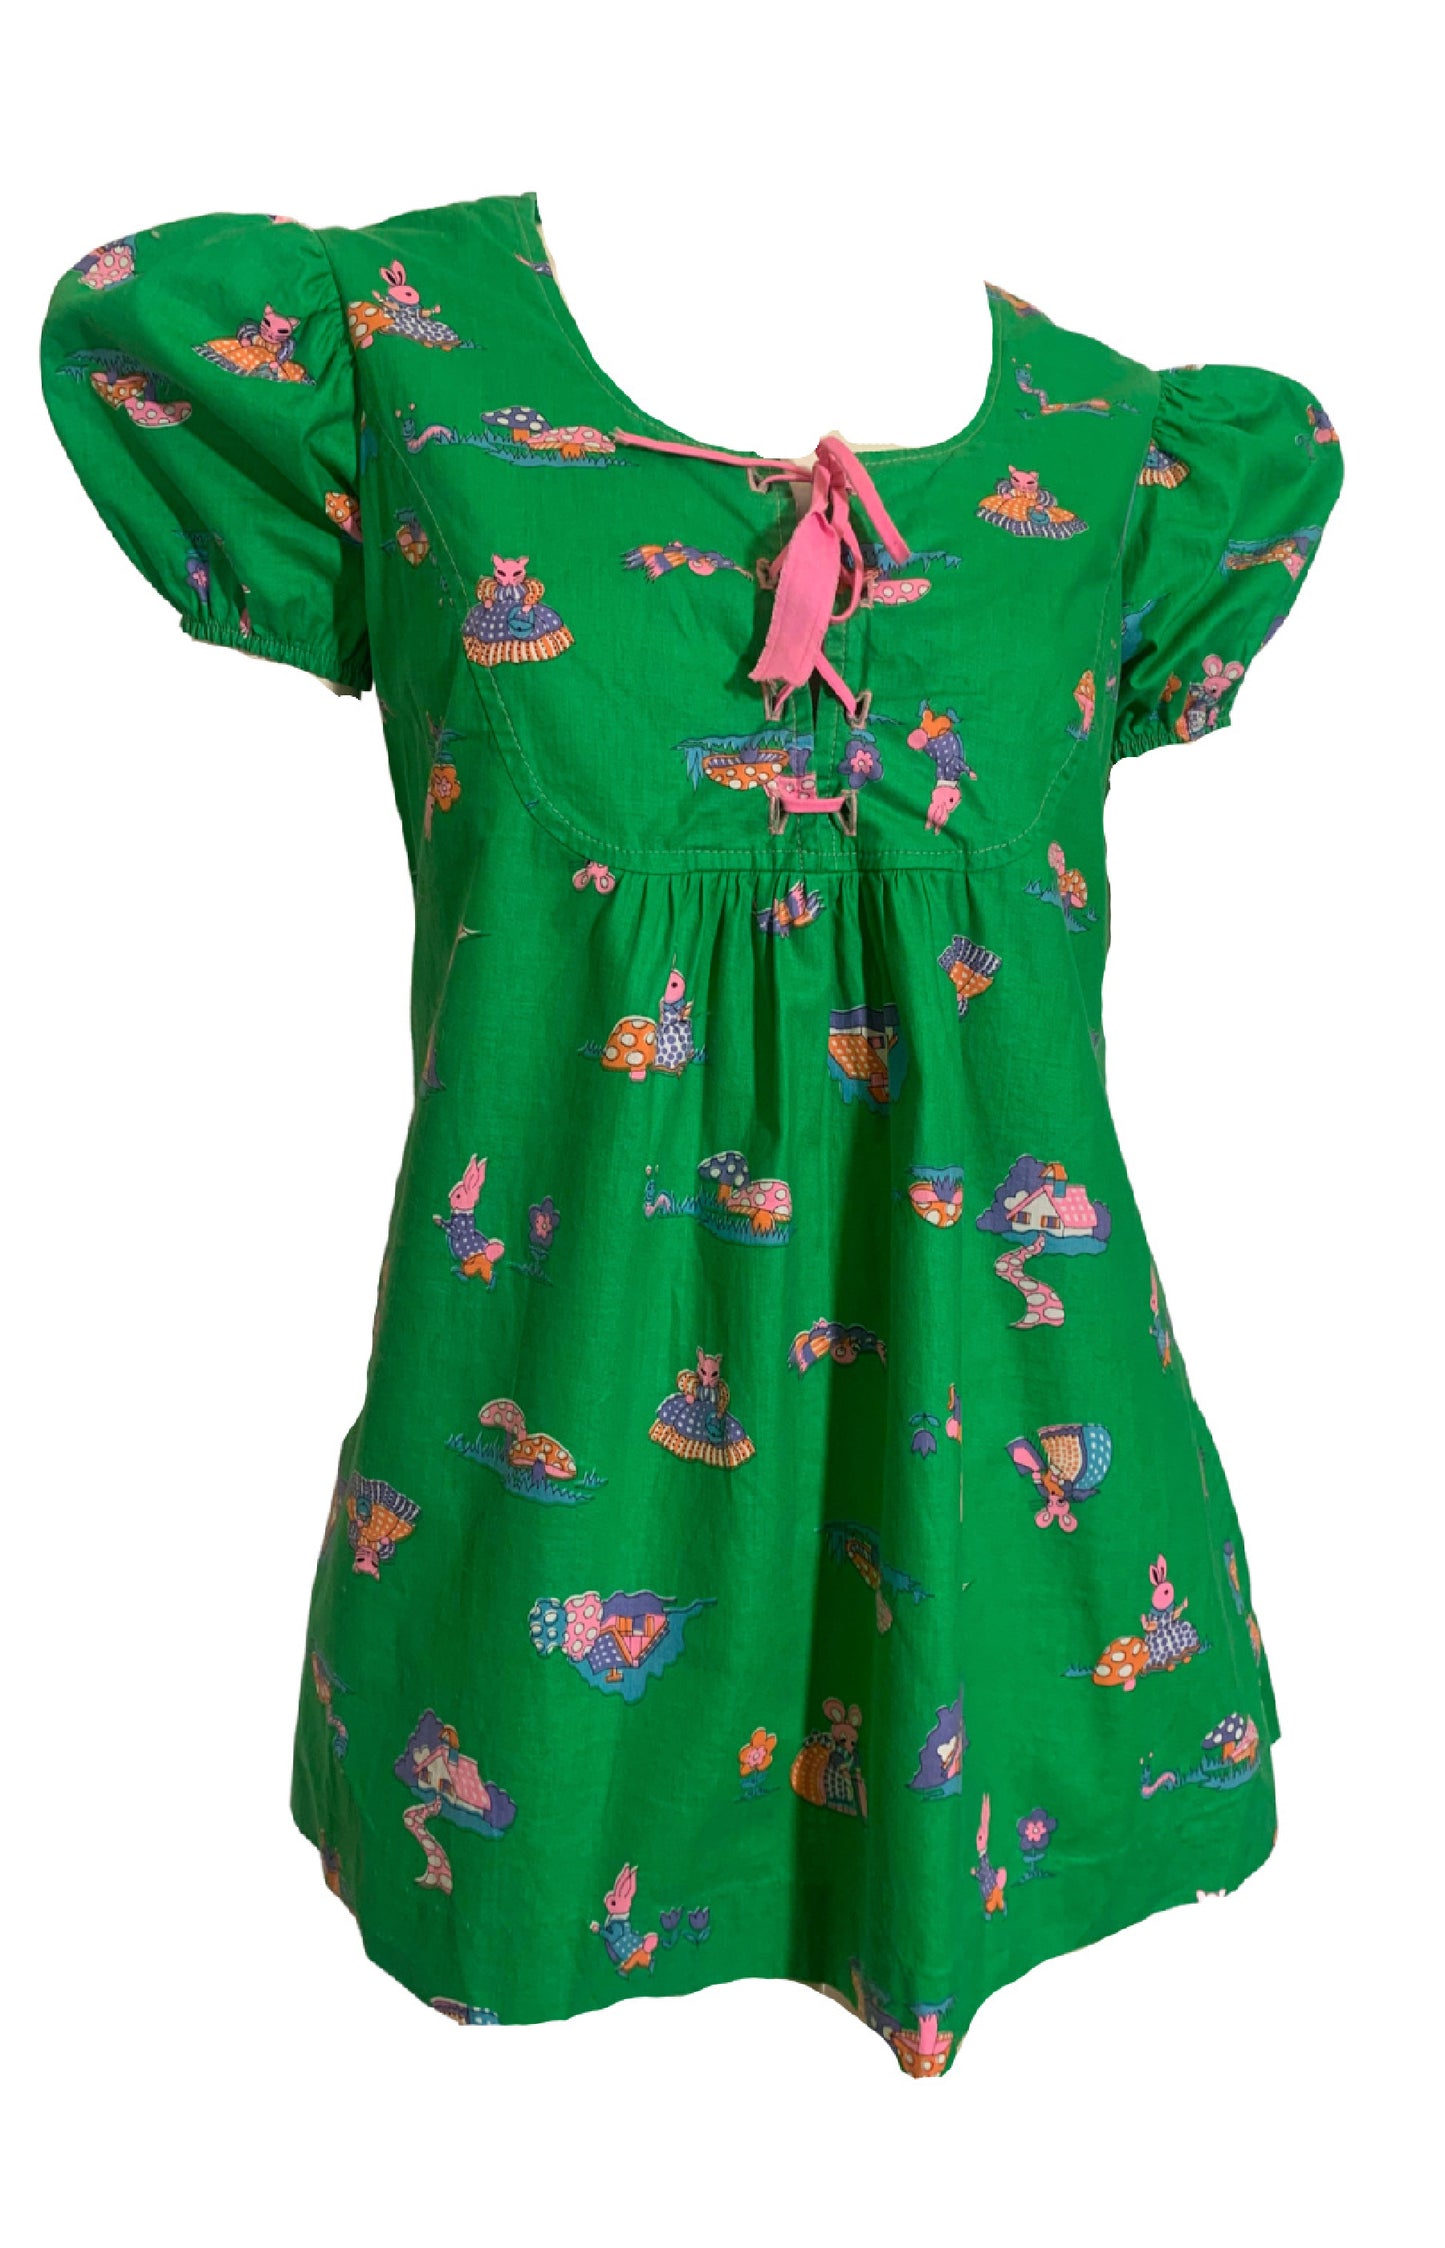 Kitschy Cute Bunny, Cats, Birds and Worms Print Babydoll Blouse circa 1970s